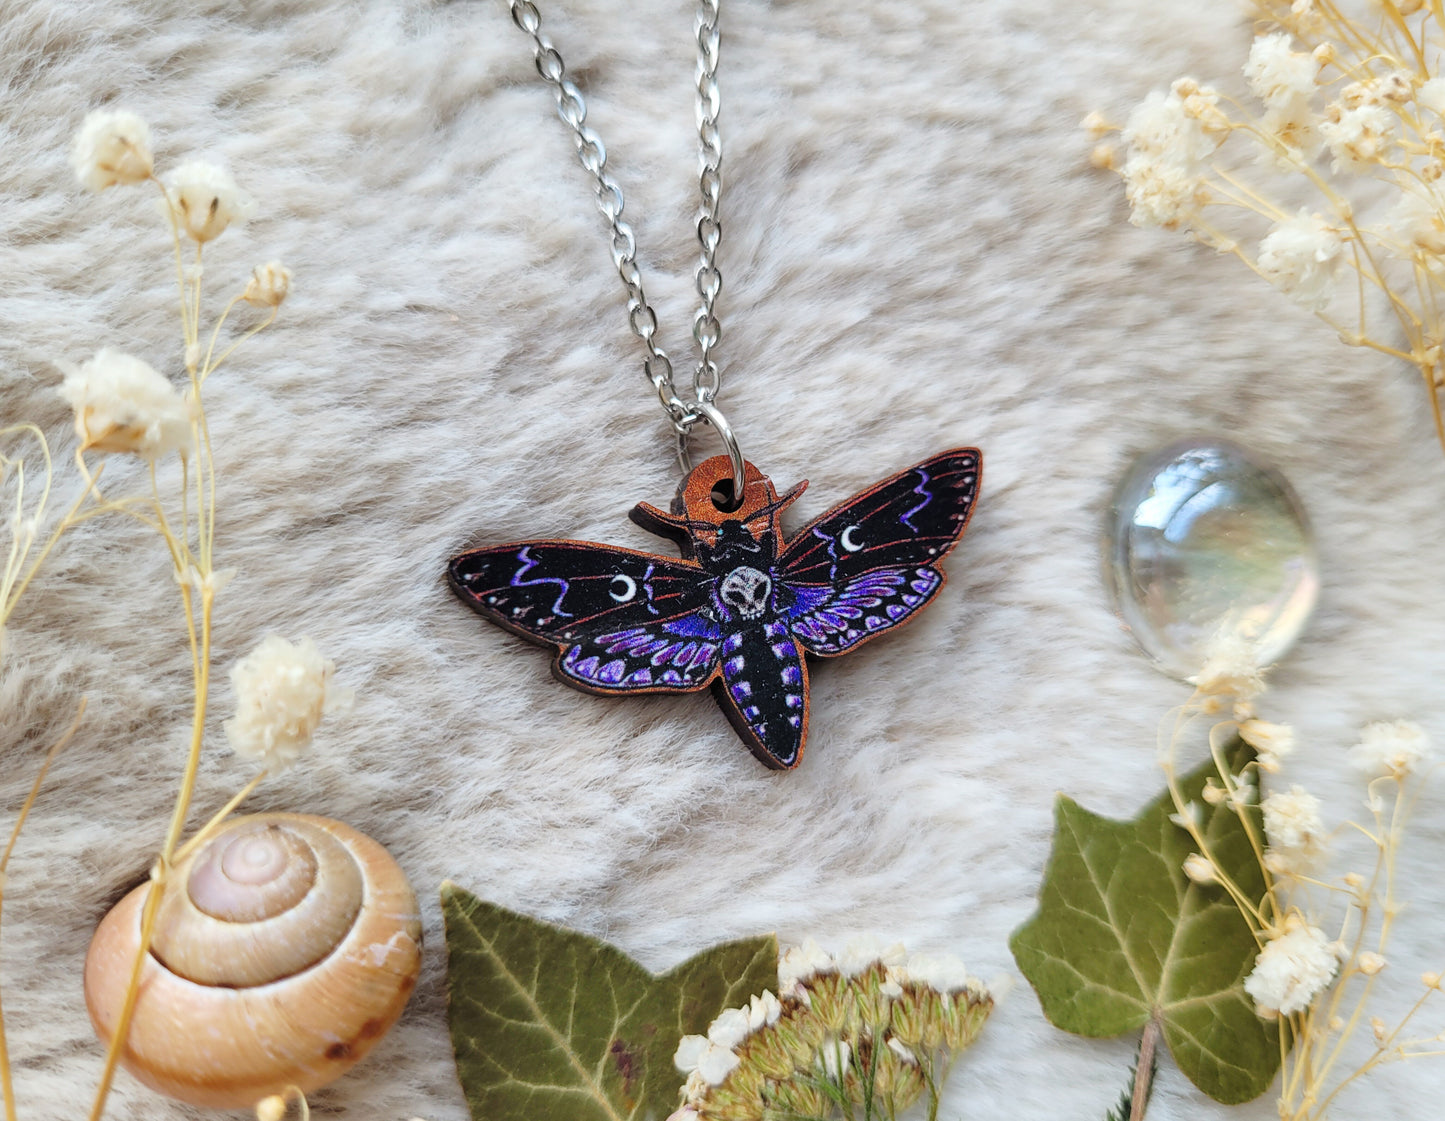 Purple Death Hawk moth Illustrated necklace, responsibly sourced cherry wood, chain options available, by Grace Moth